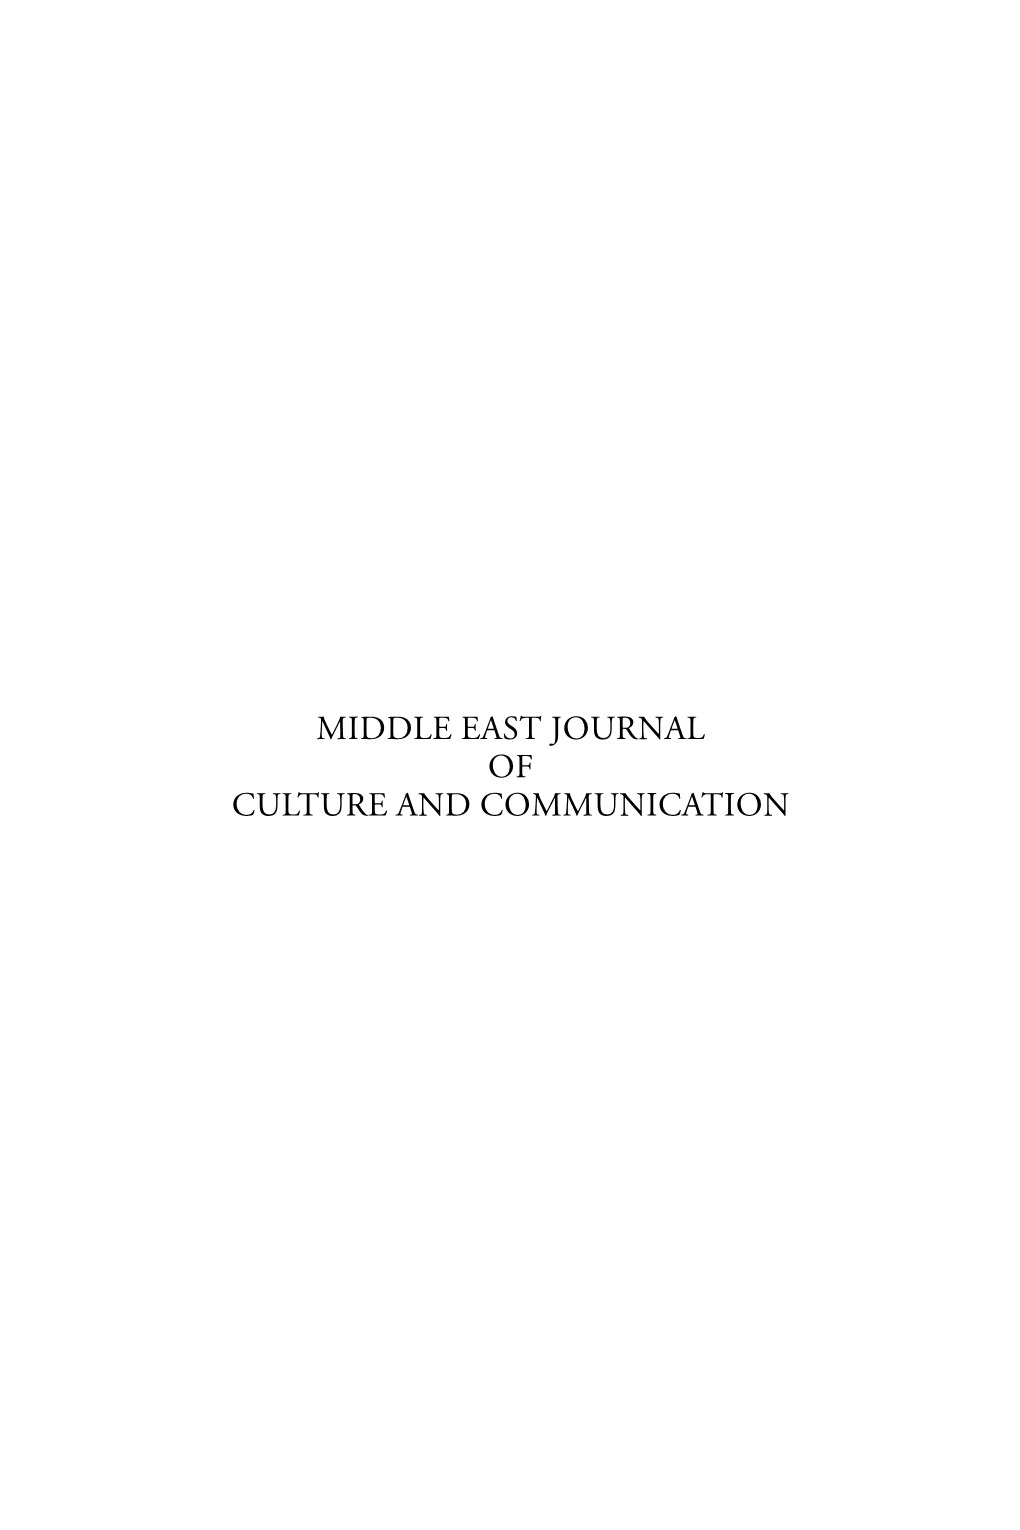 MIDDLE EAST JOURNAL of CULTURE and COMMUNICATION Middle East Journal of Culture and Communication